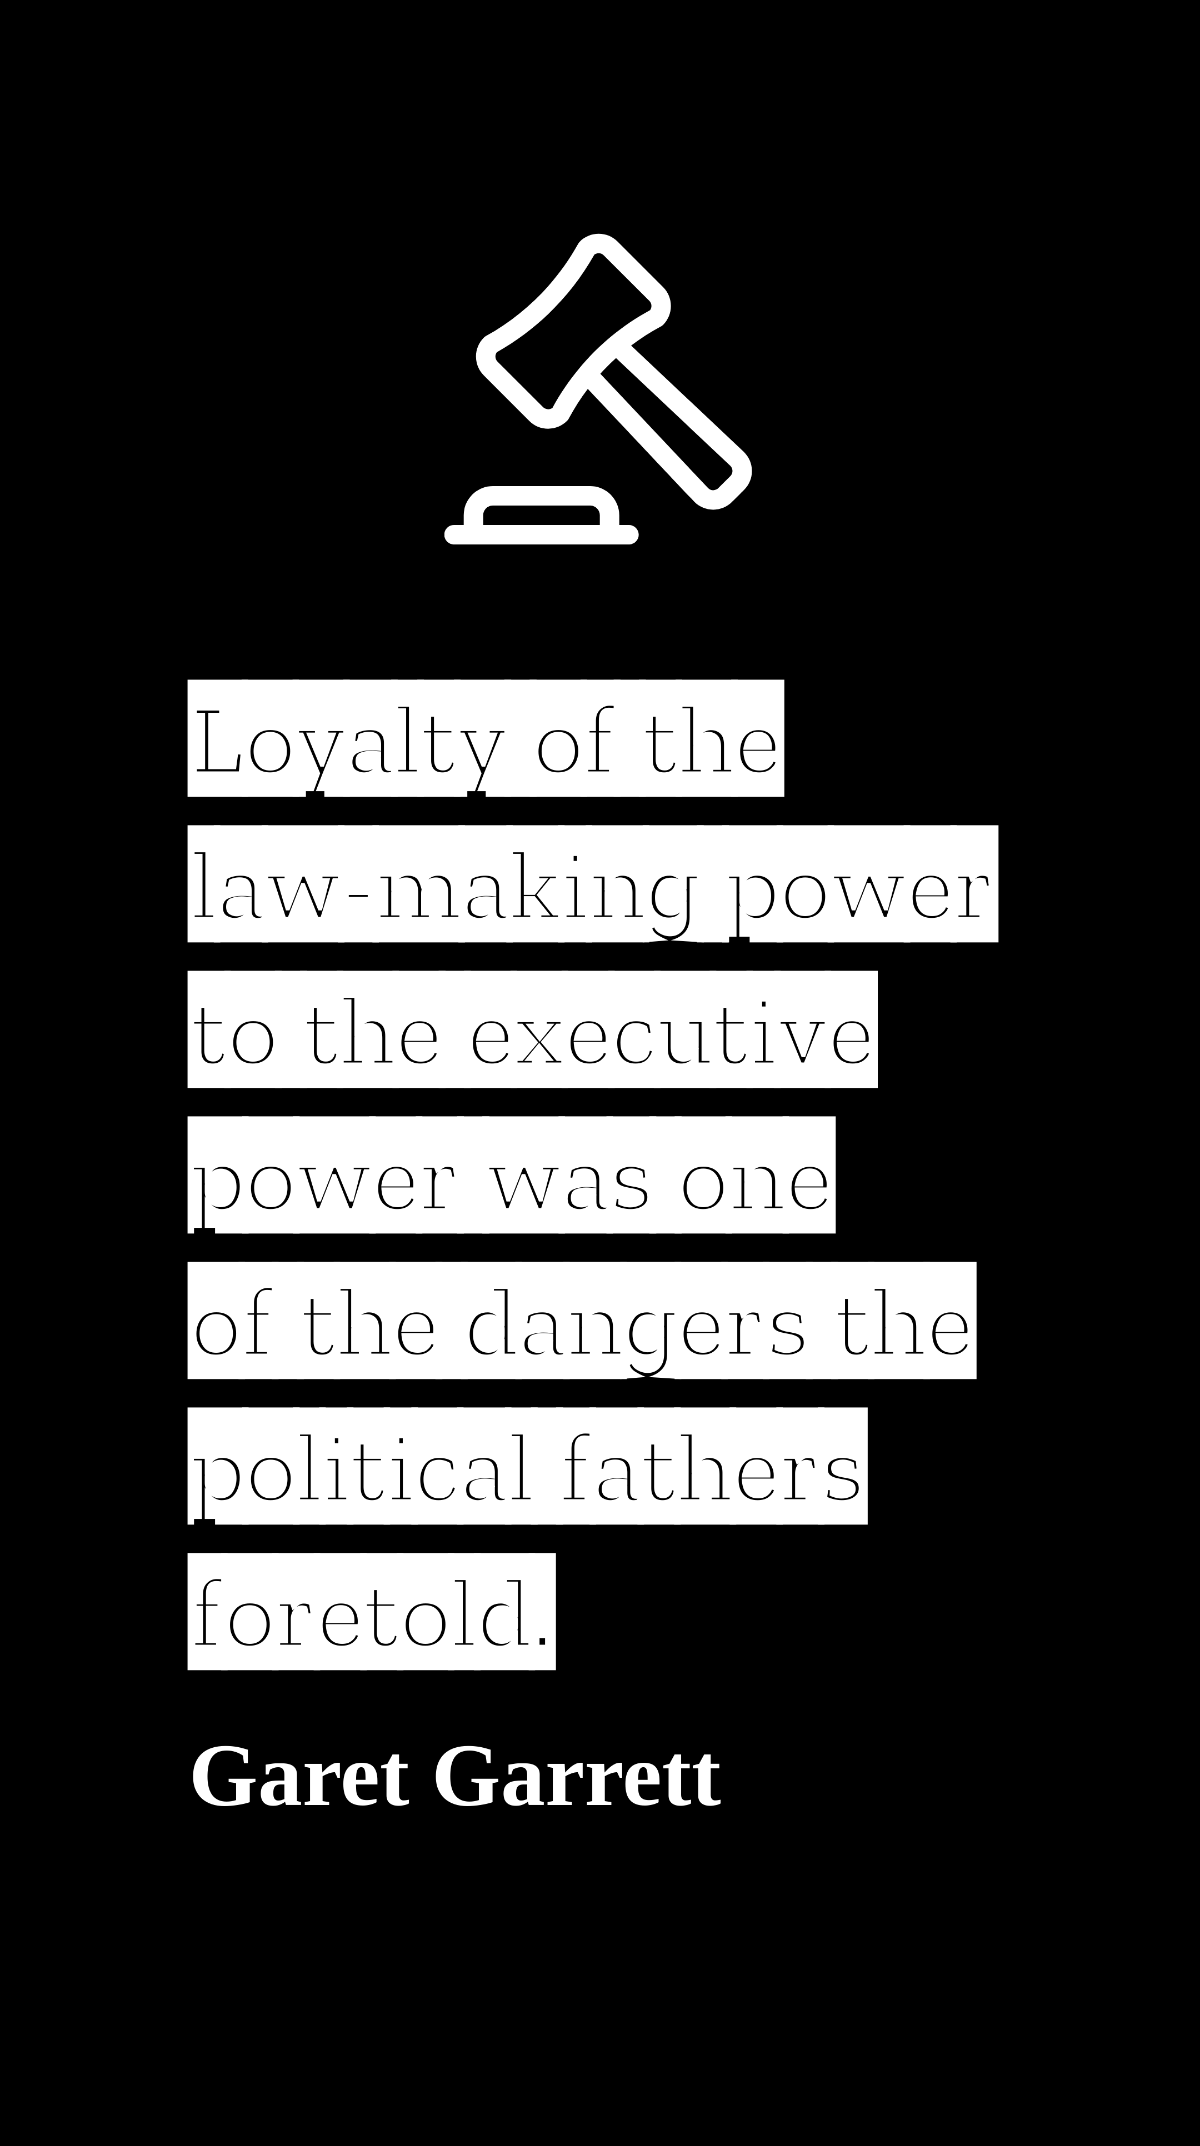 Garet Garrett - Loyalty of the law-making power to the executive power was one of the dangers the political fathers foretold. Template